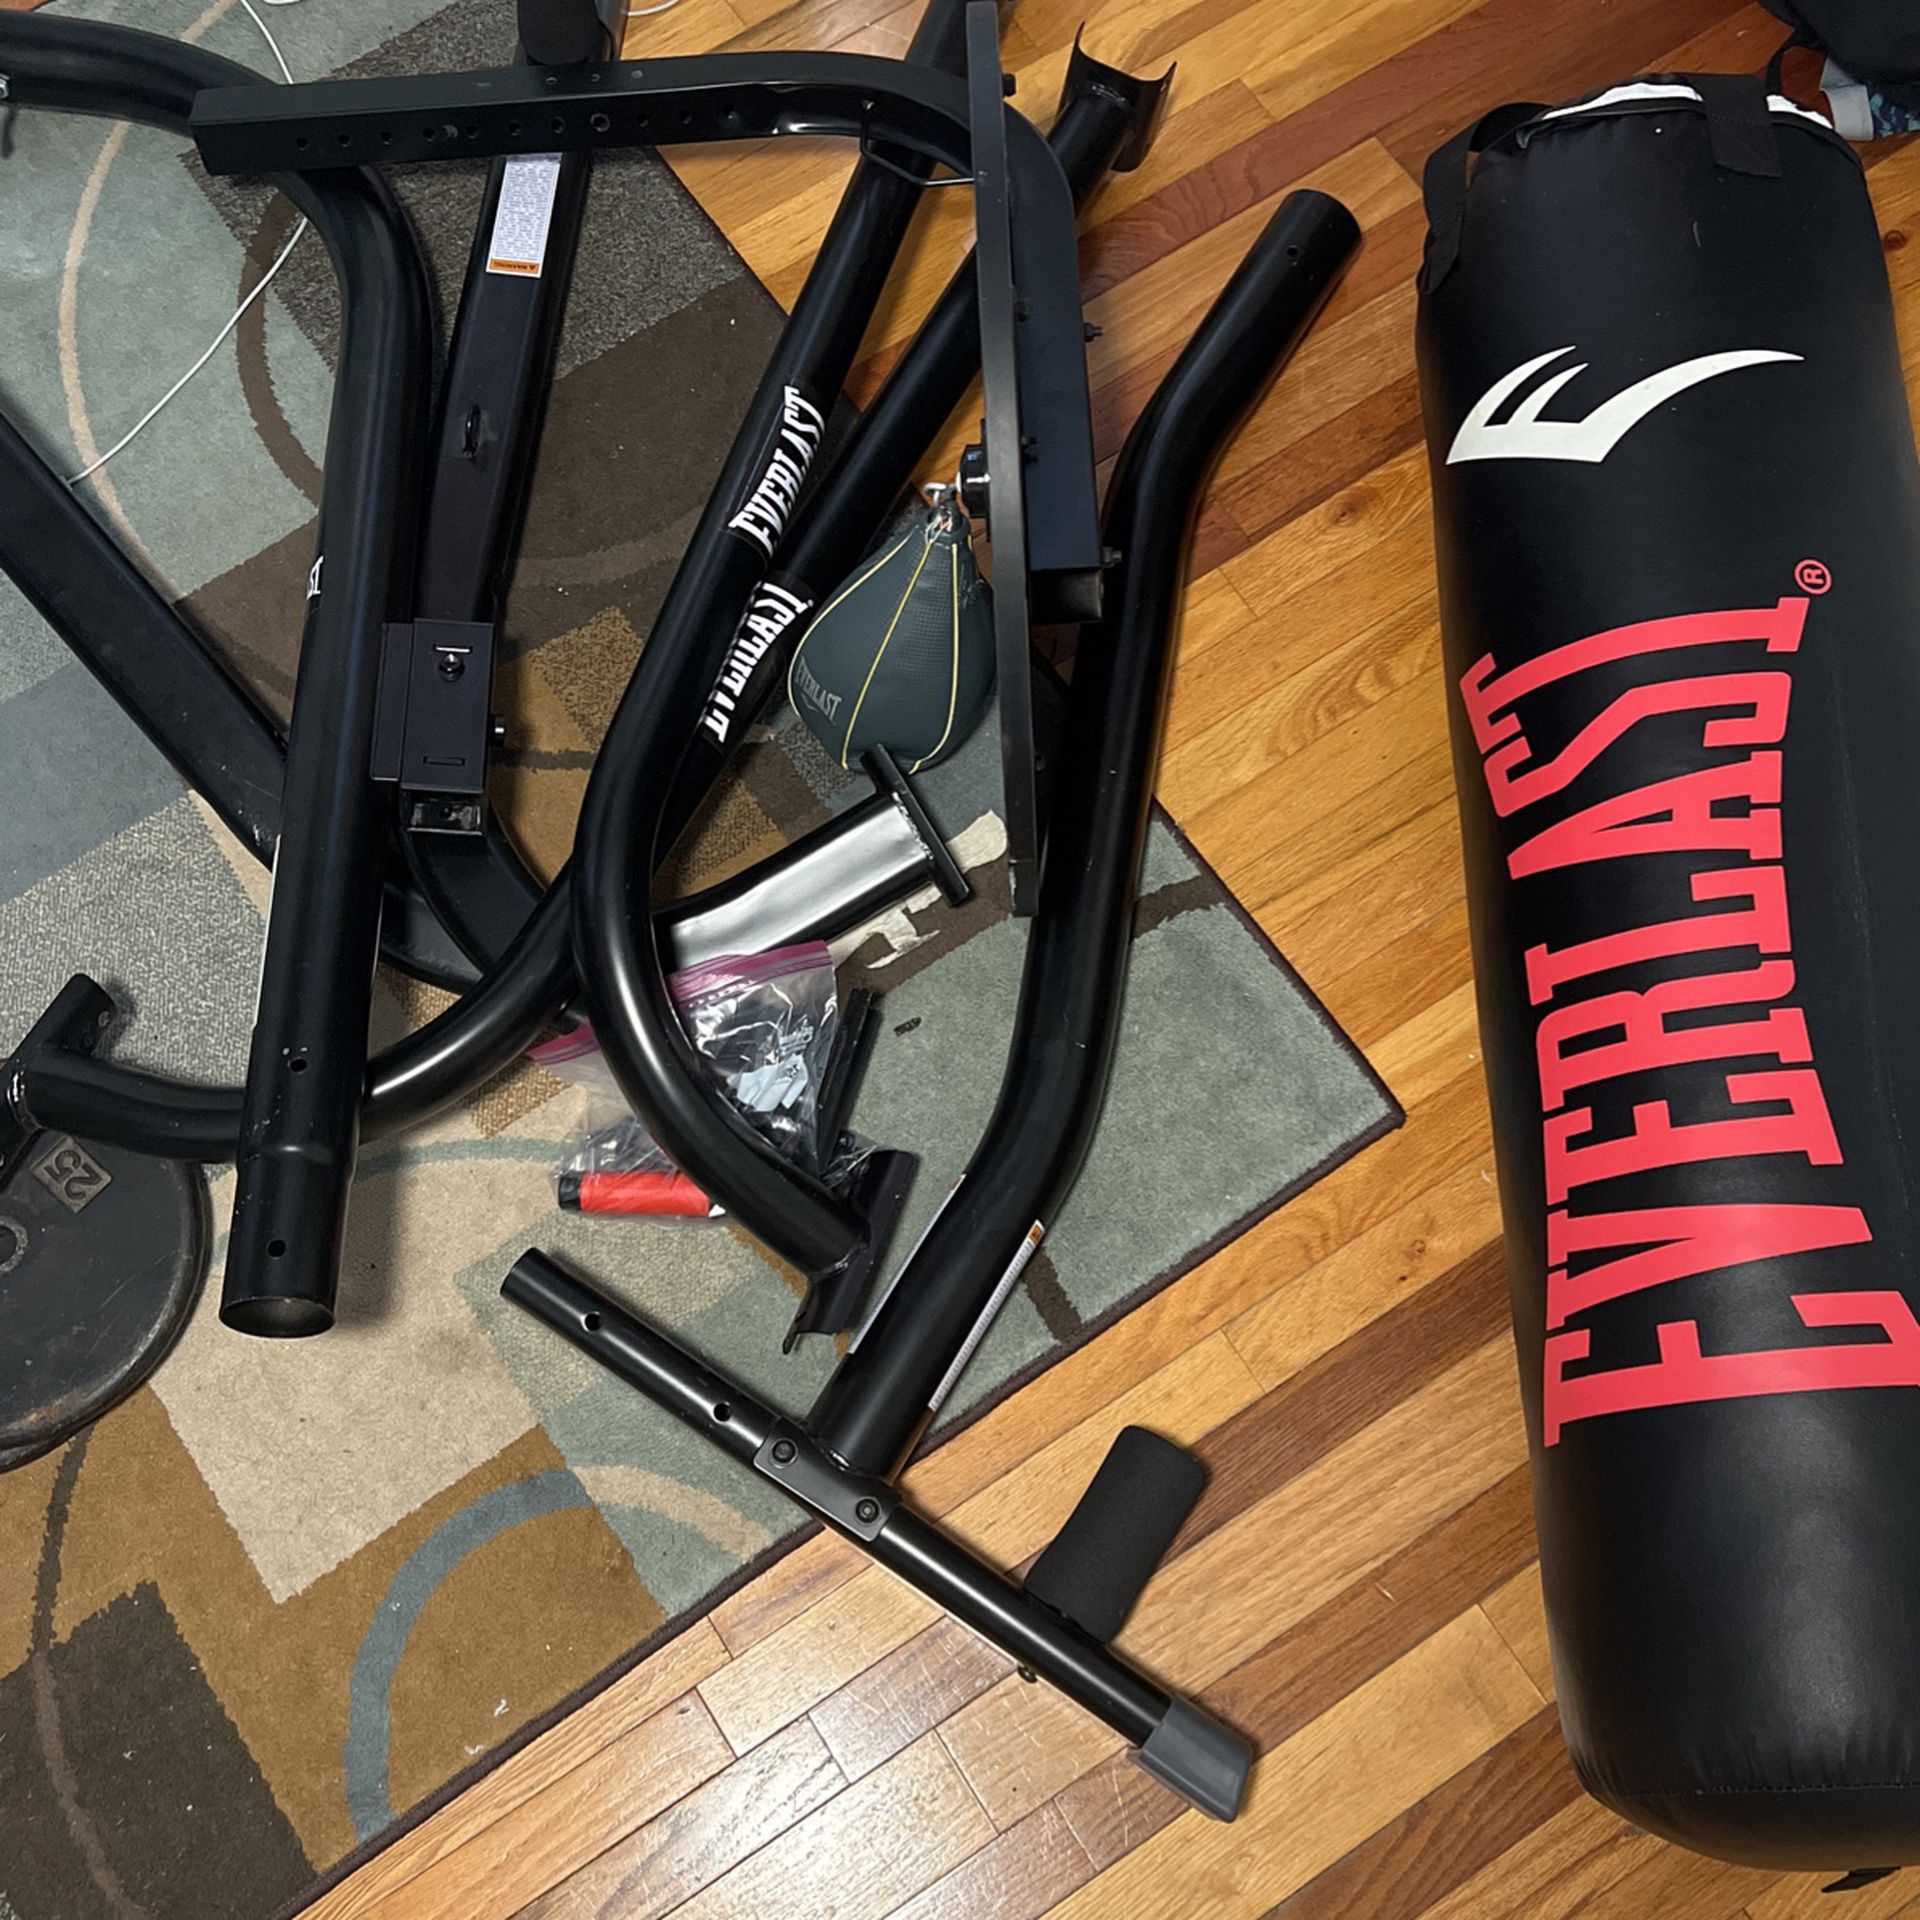 Everlast boxing bag with speed bag